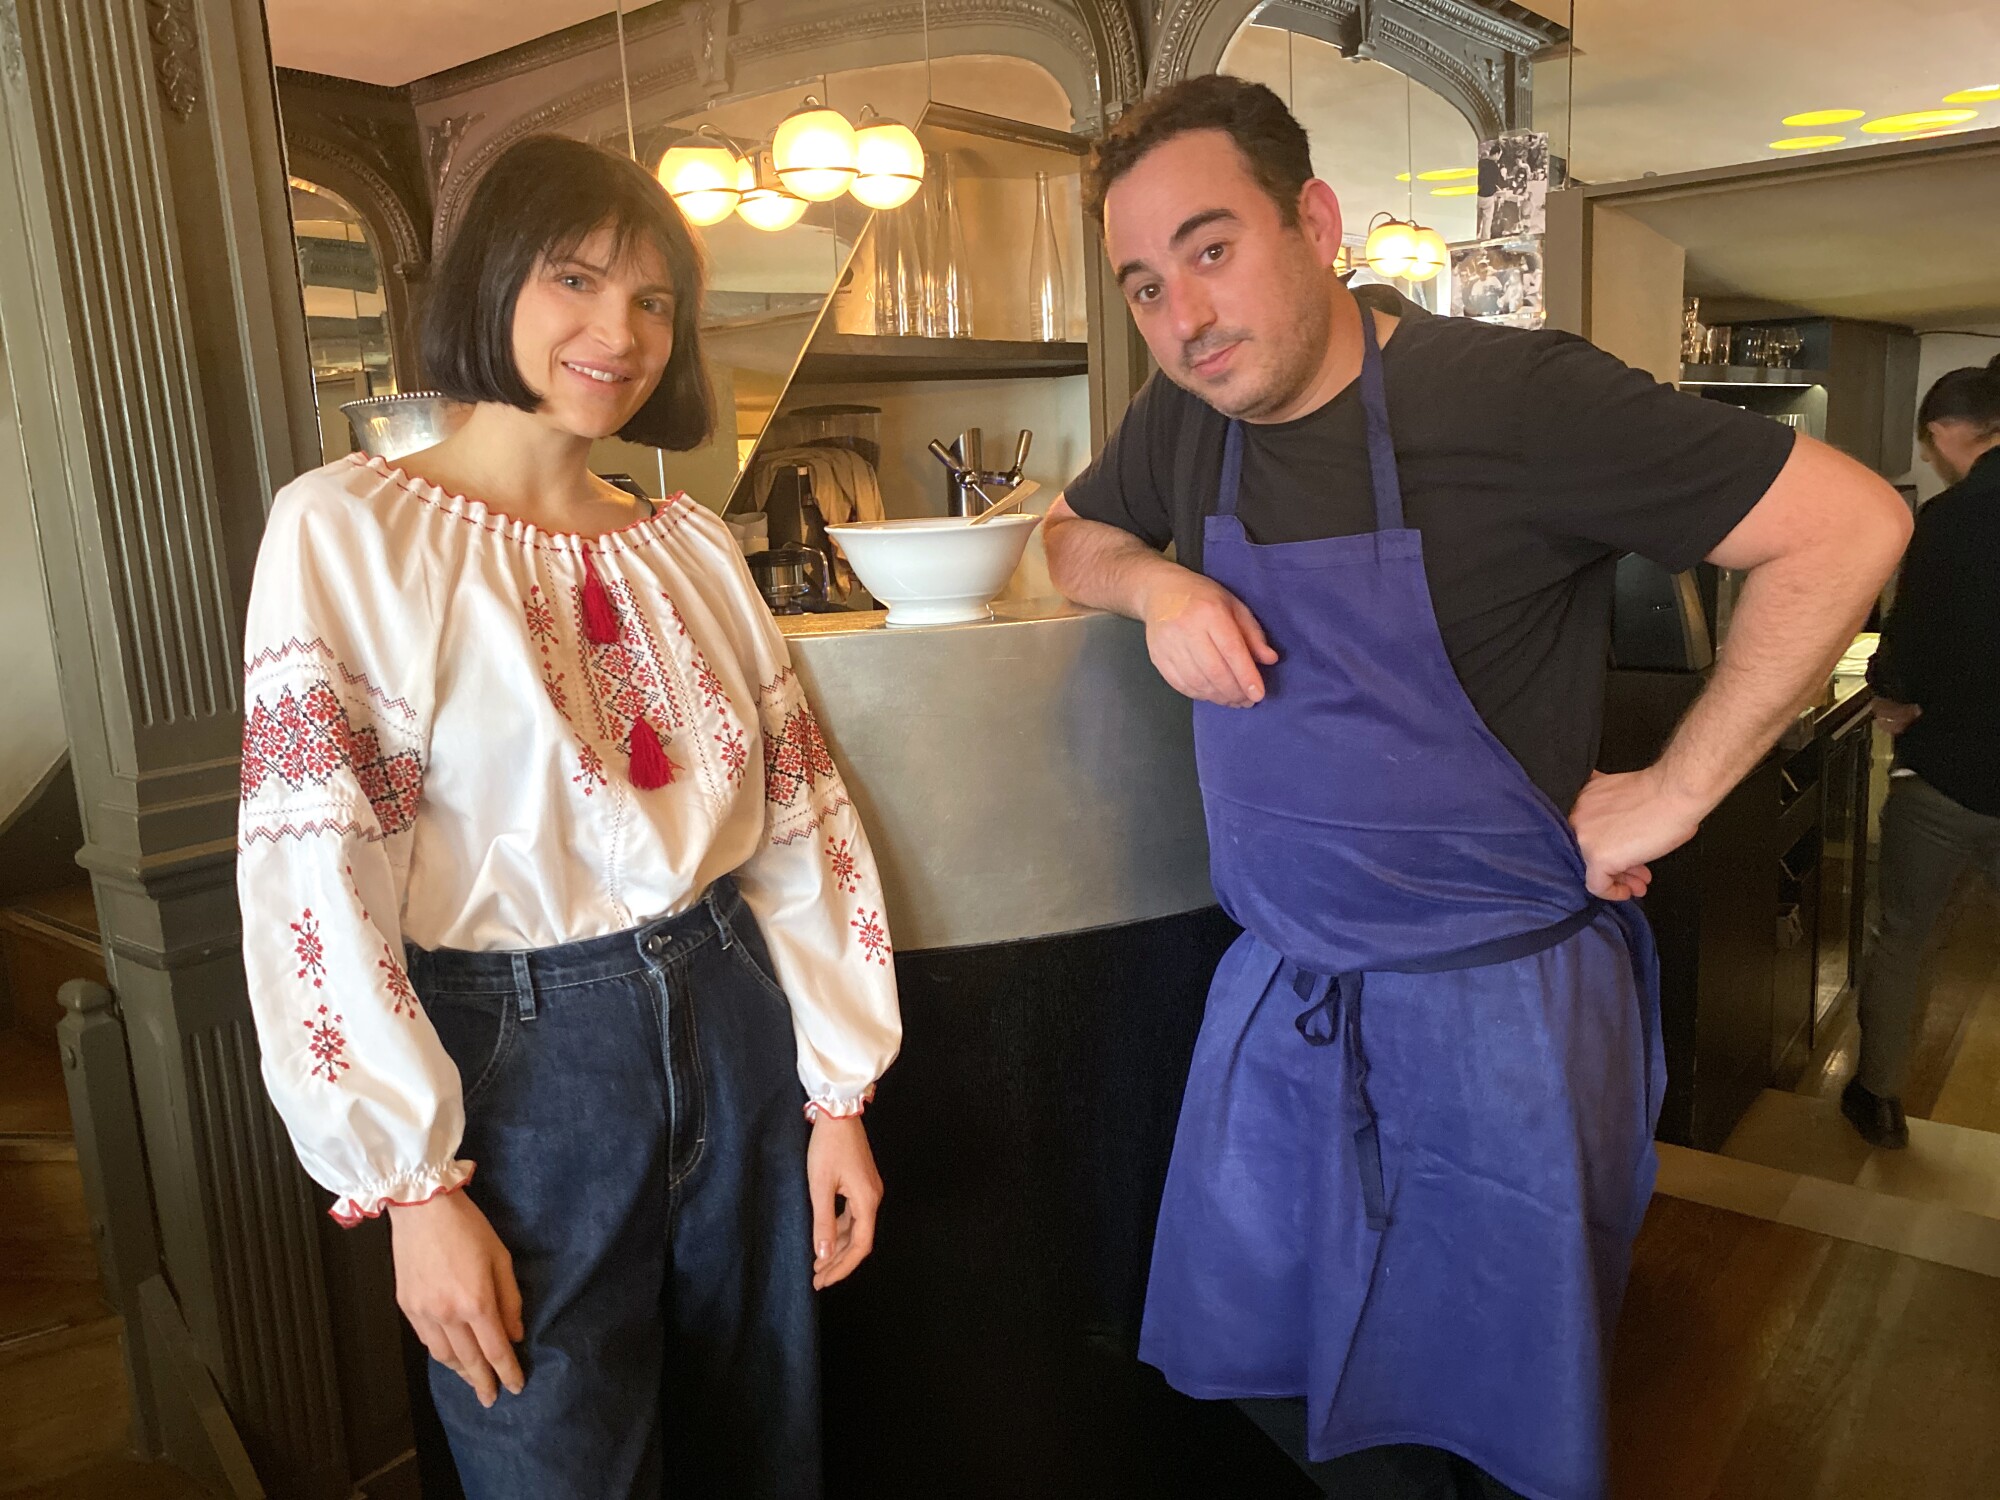 Alina Prokopenko with chef Daniel Rose, the owner of the restaurant.